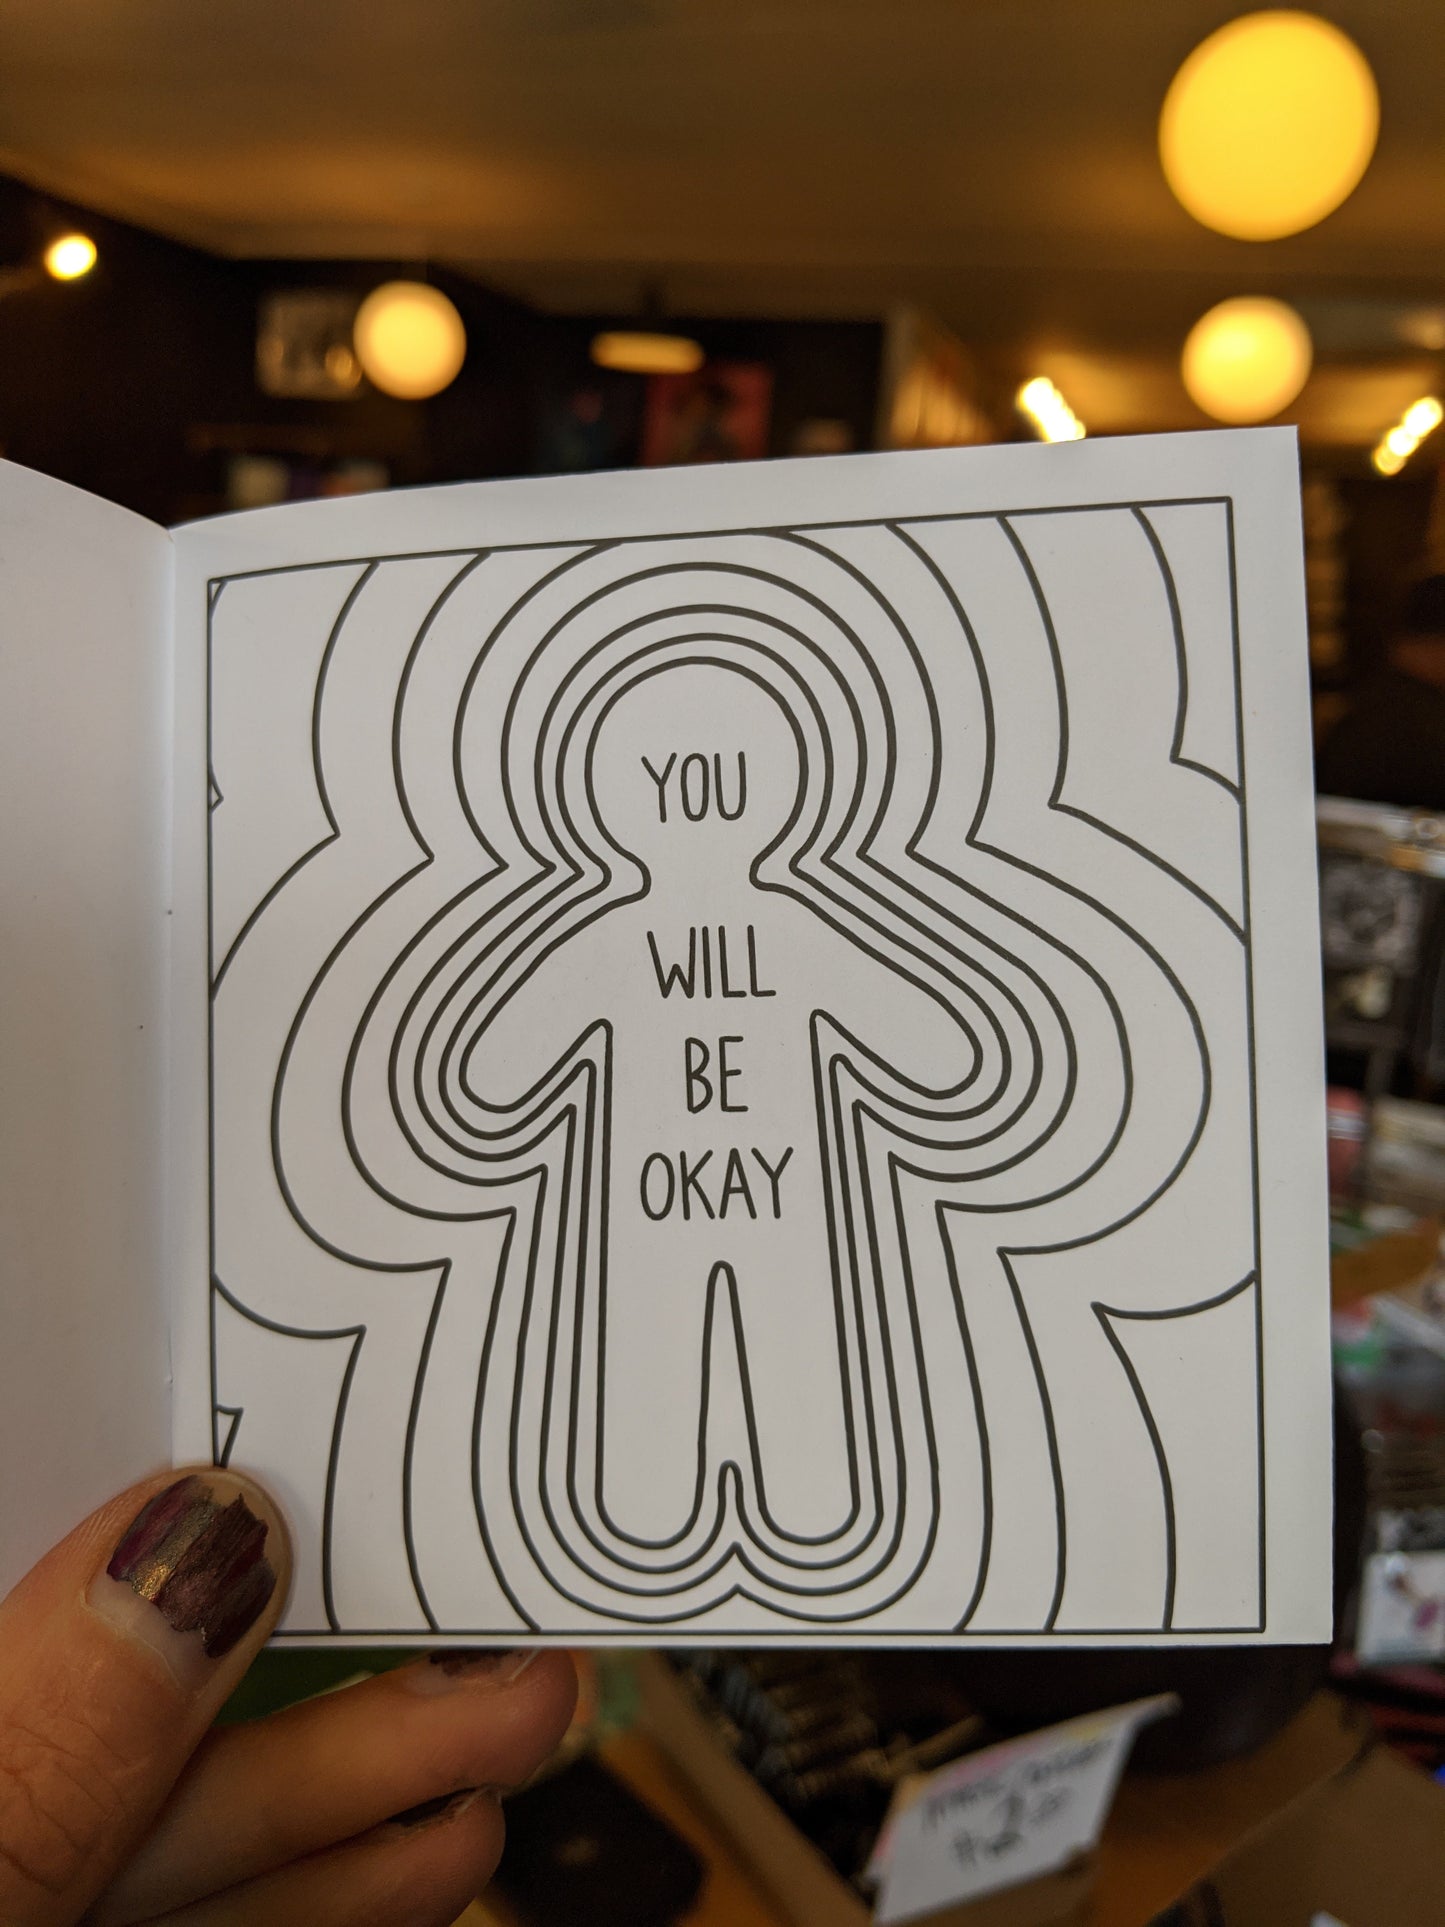 PDF Download: You Will Be Okay by Meggie Ramm